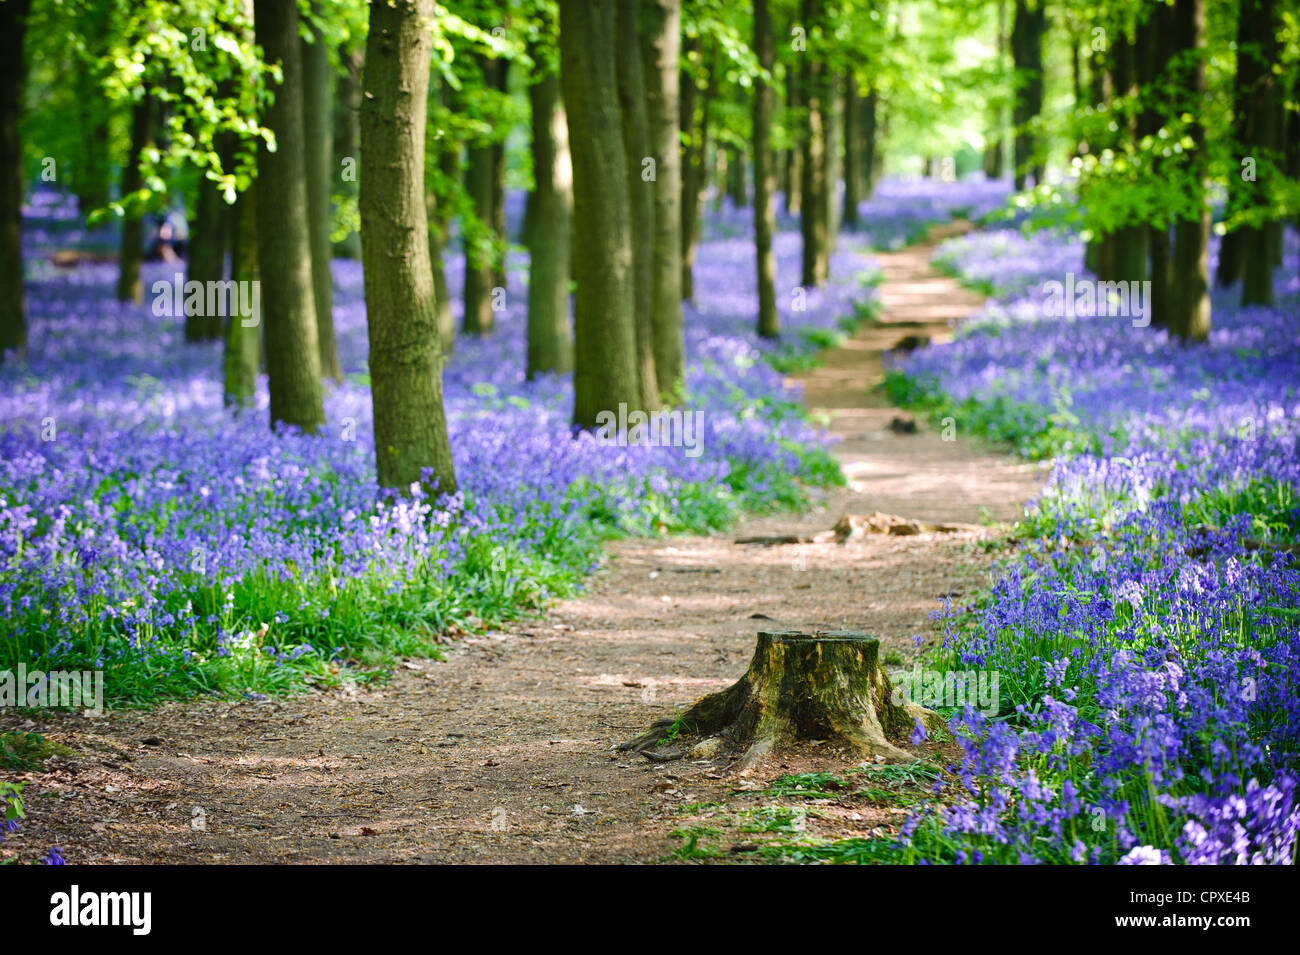 Bluebells in full bloom covering the floor in a carpet of blue in a beautiful beach tree woodland in Hertfordshire, England, UK Stock Photo